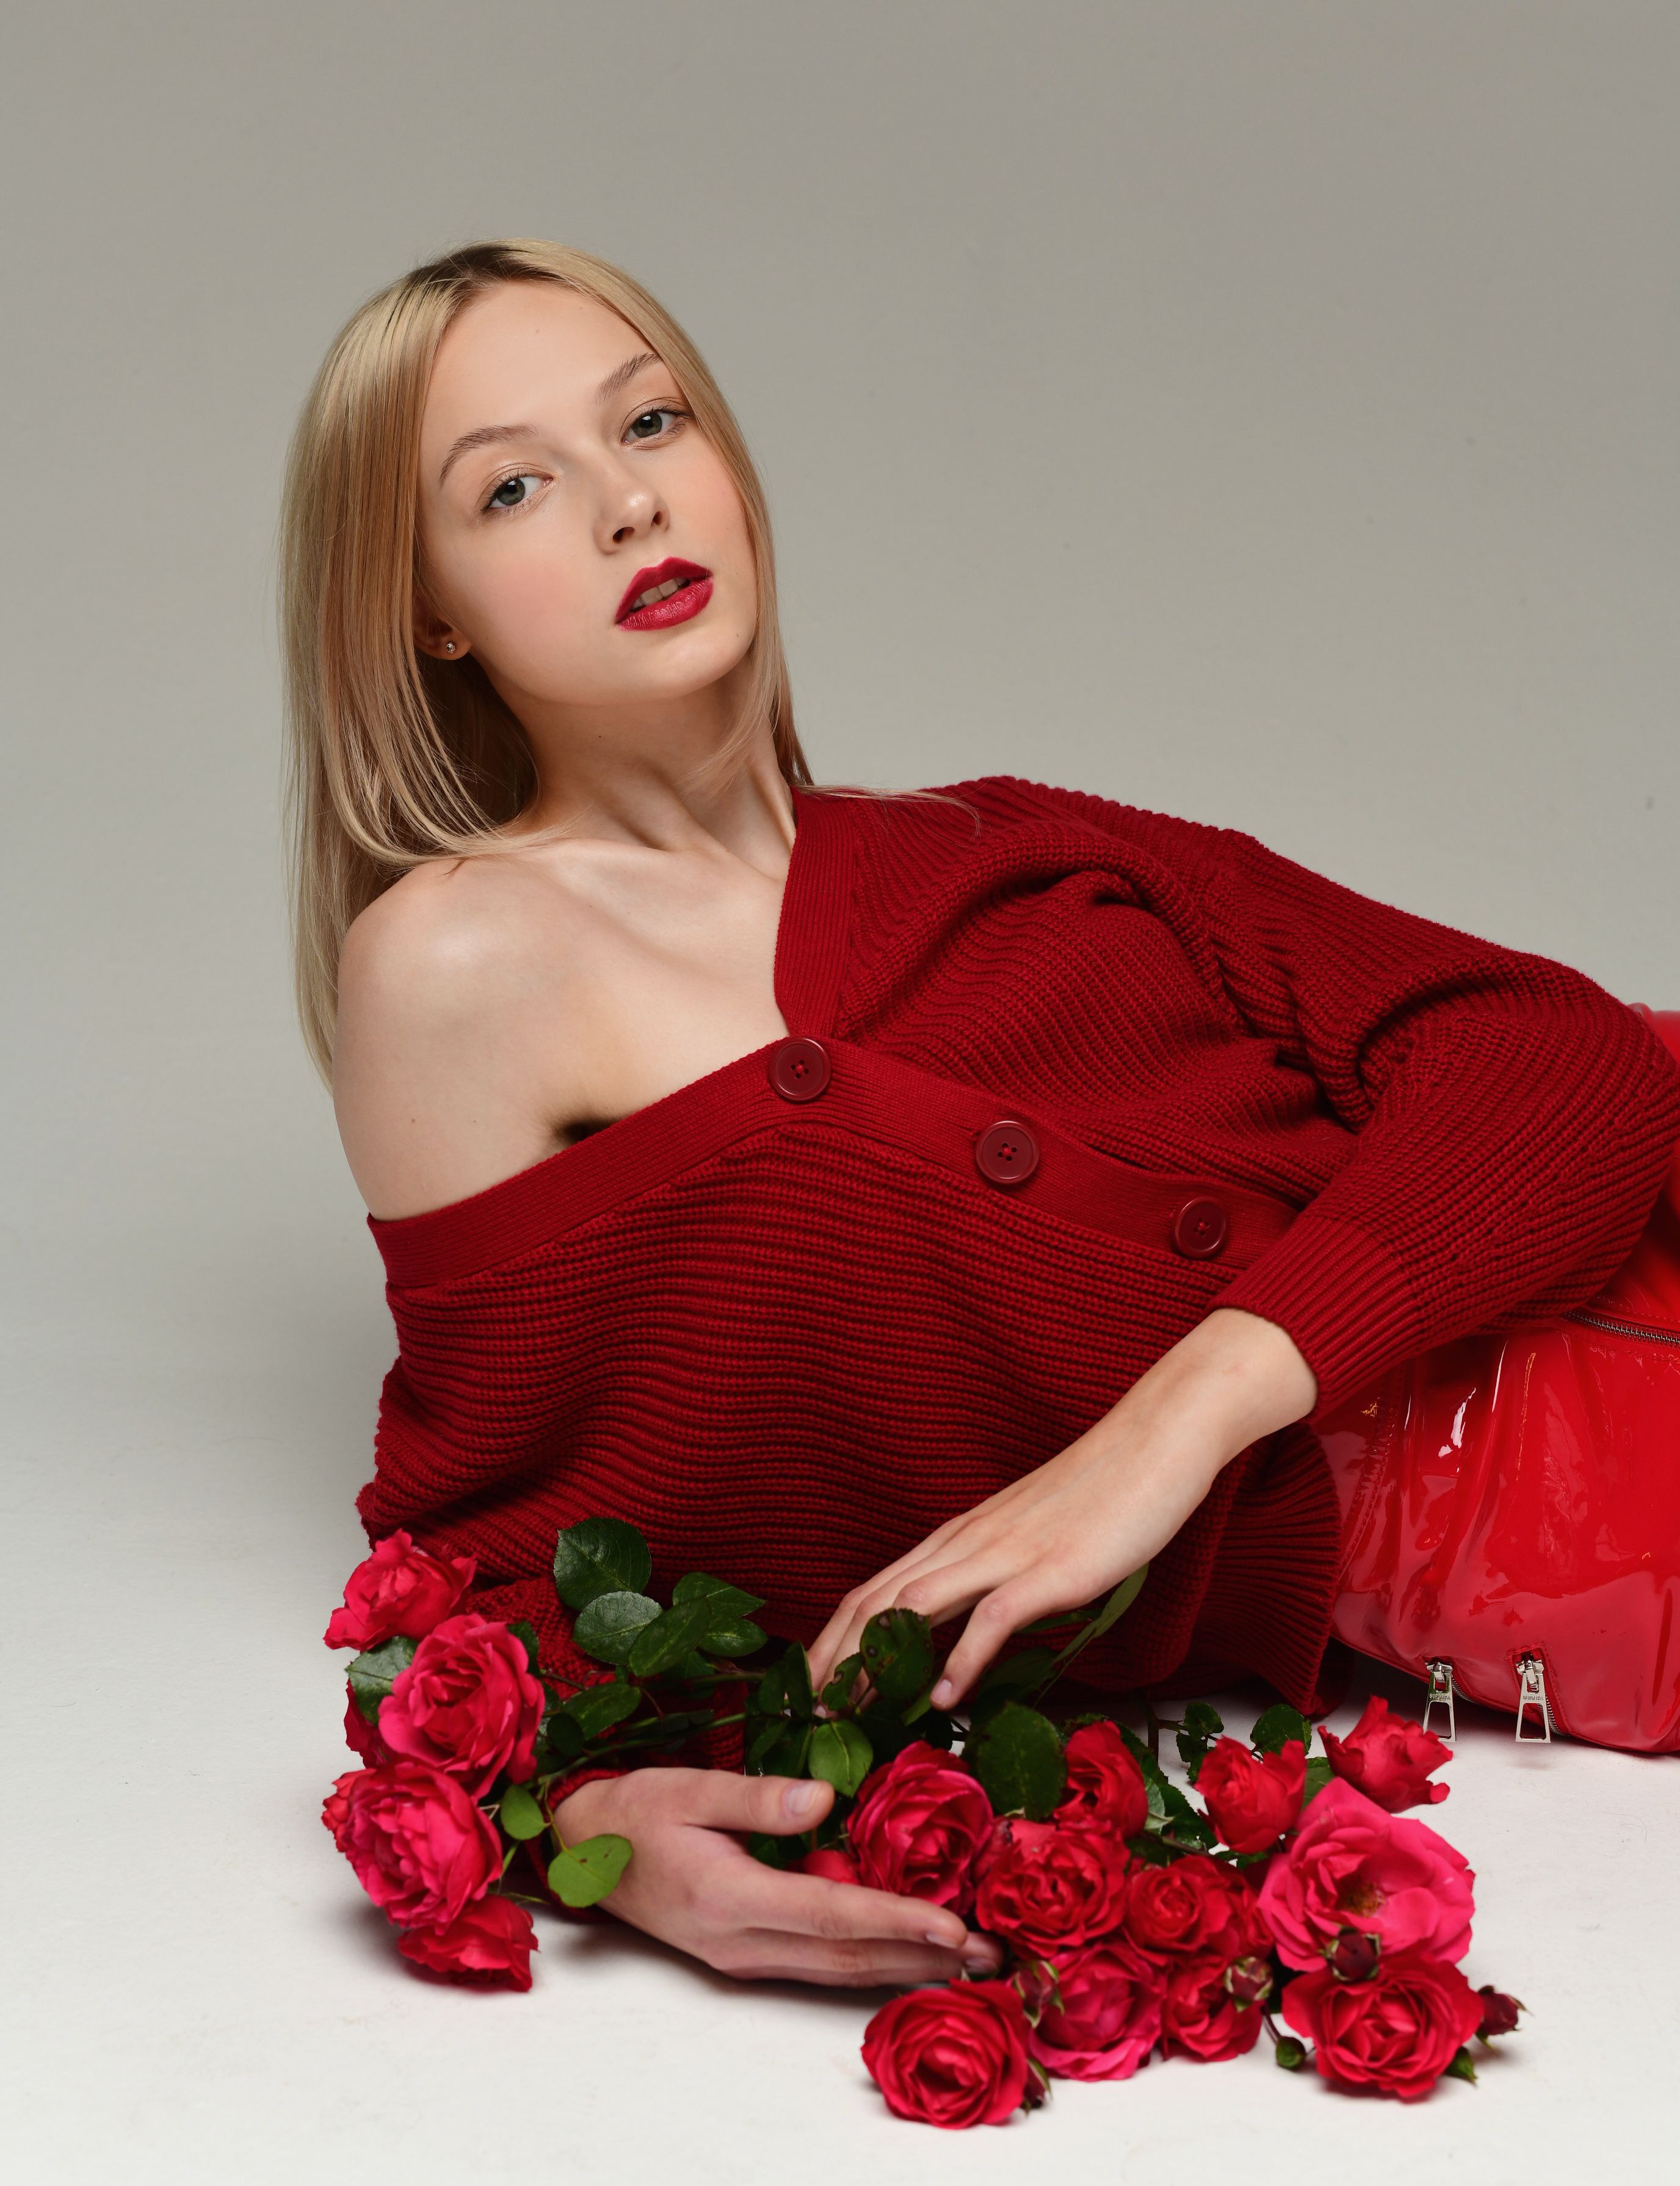 People 2752x3581 Bozhena Puchko women red clothing flowers red lipstick blonde simple background portrait display